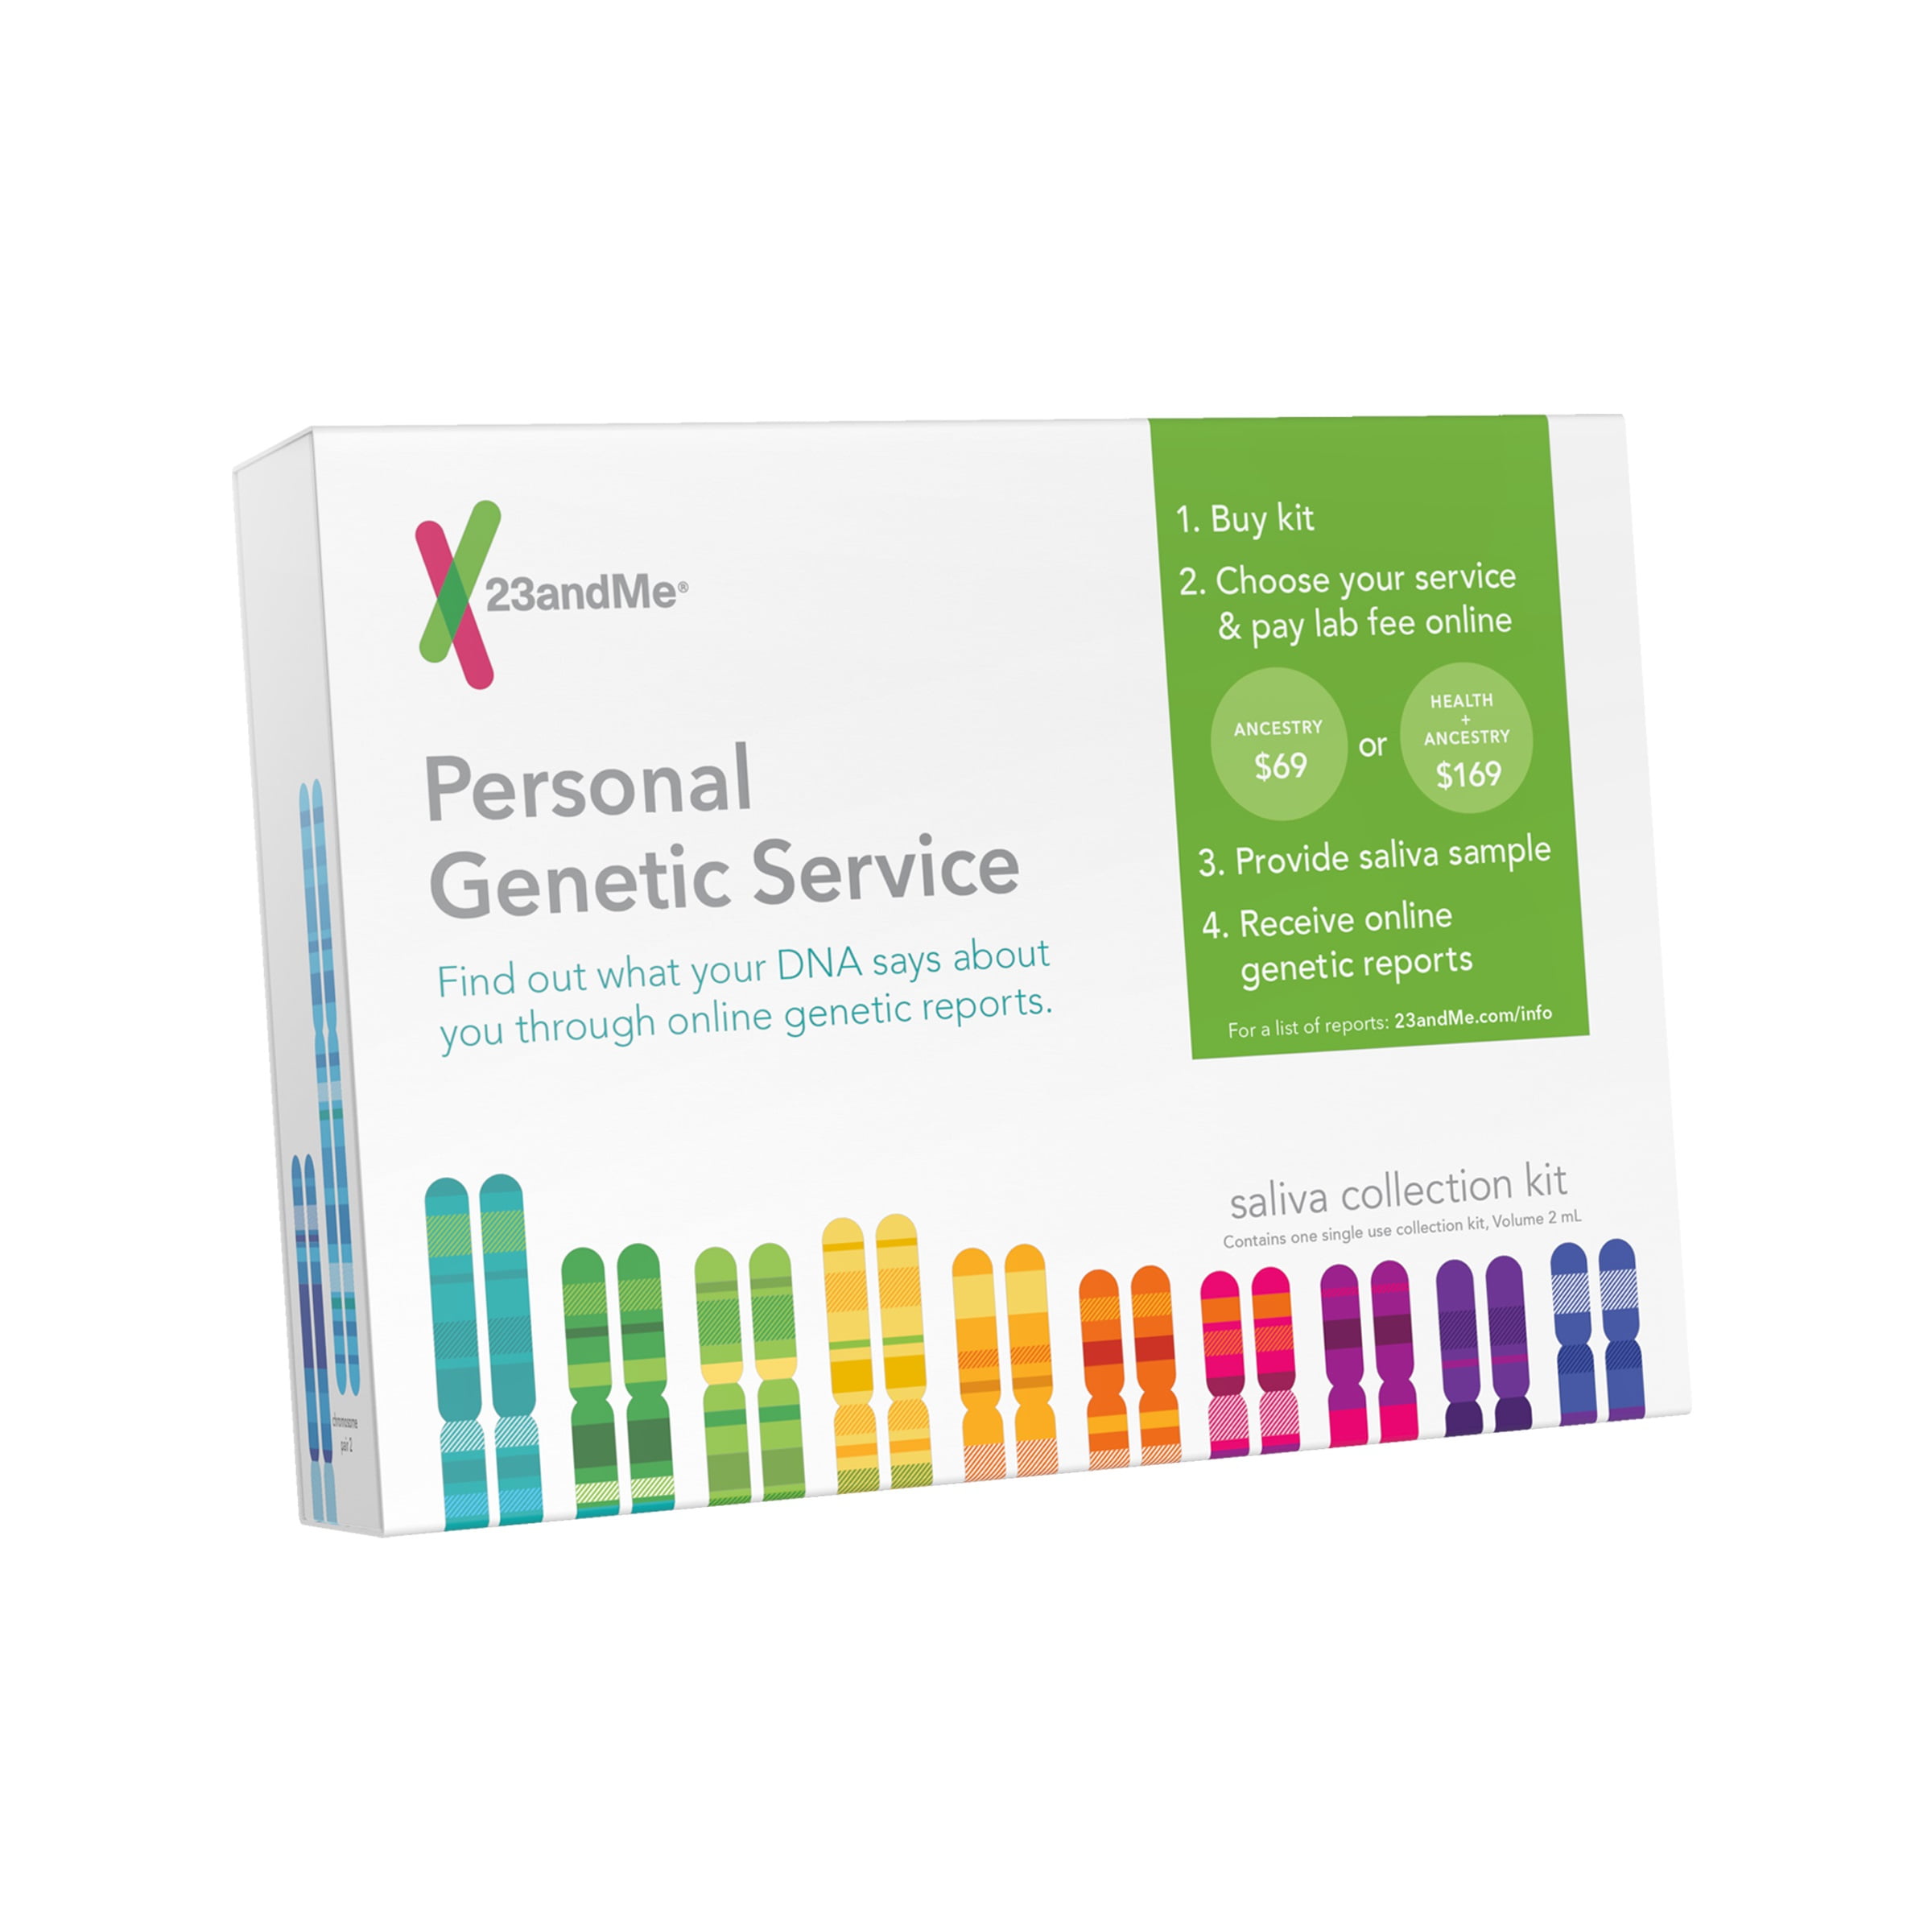 23andMe Adds a New VIP Health + Ancestry Service - 23andMe Blog